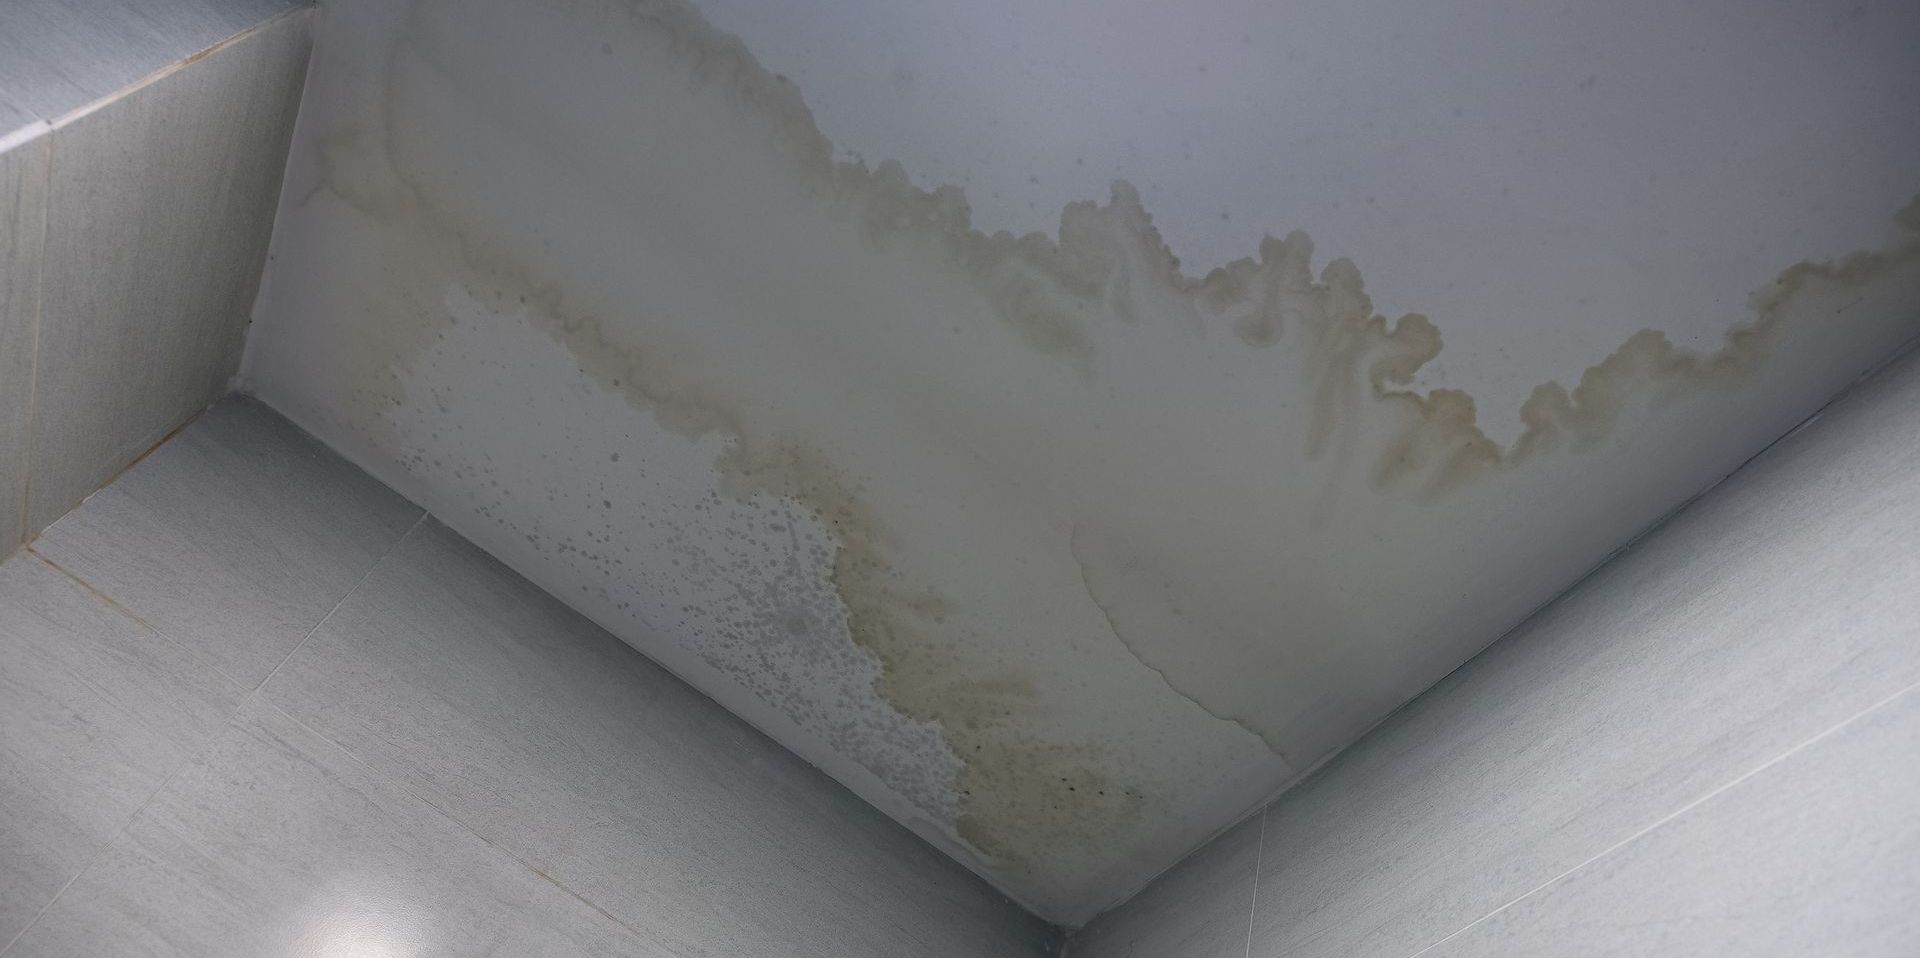 Water stains can often signify water damage and mold, which could pose significant health concerns if not addressed promptly. 